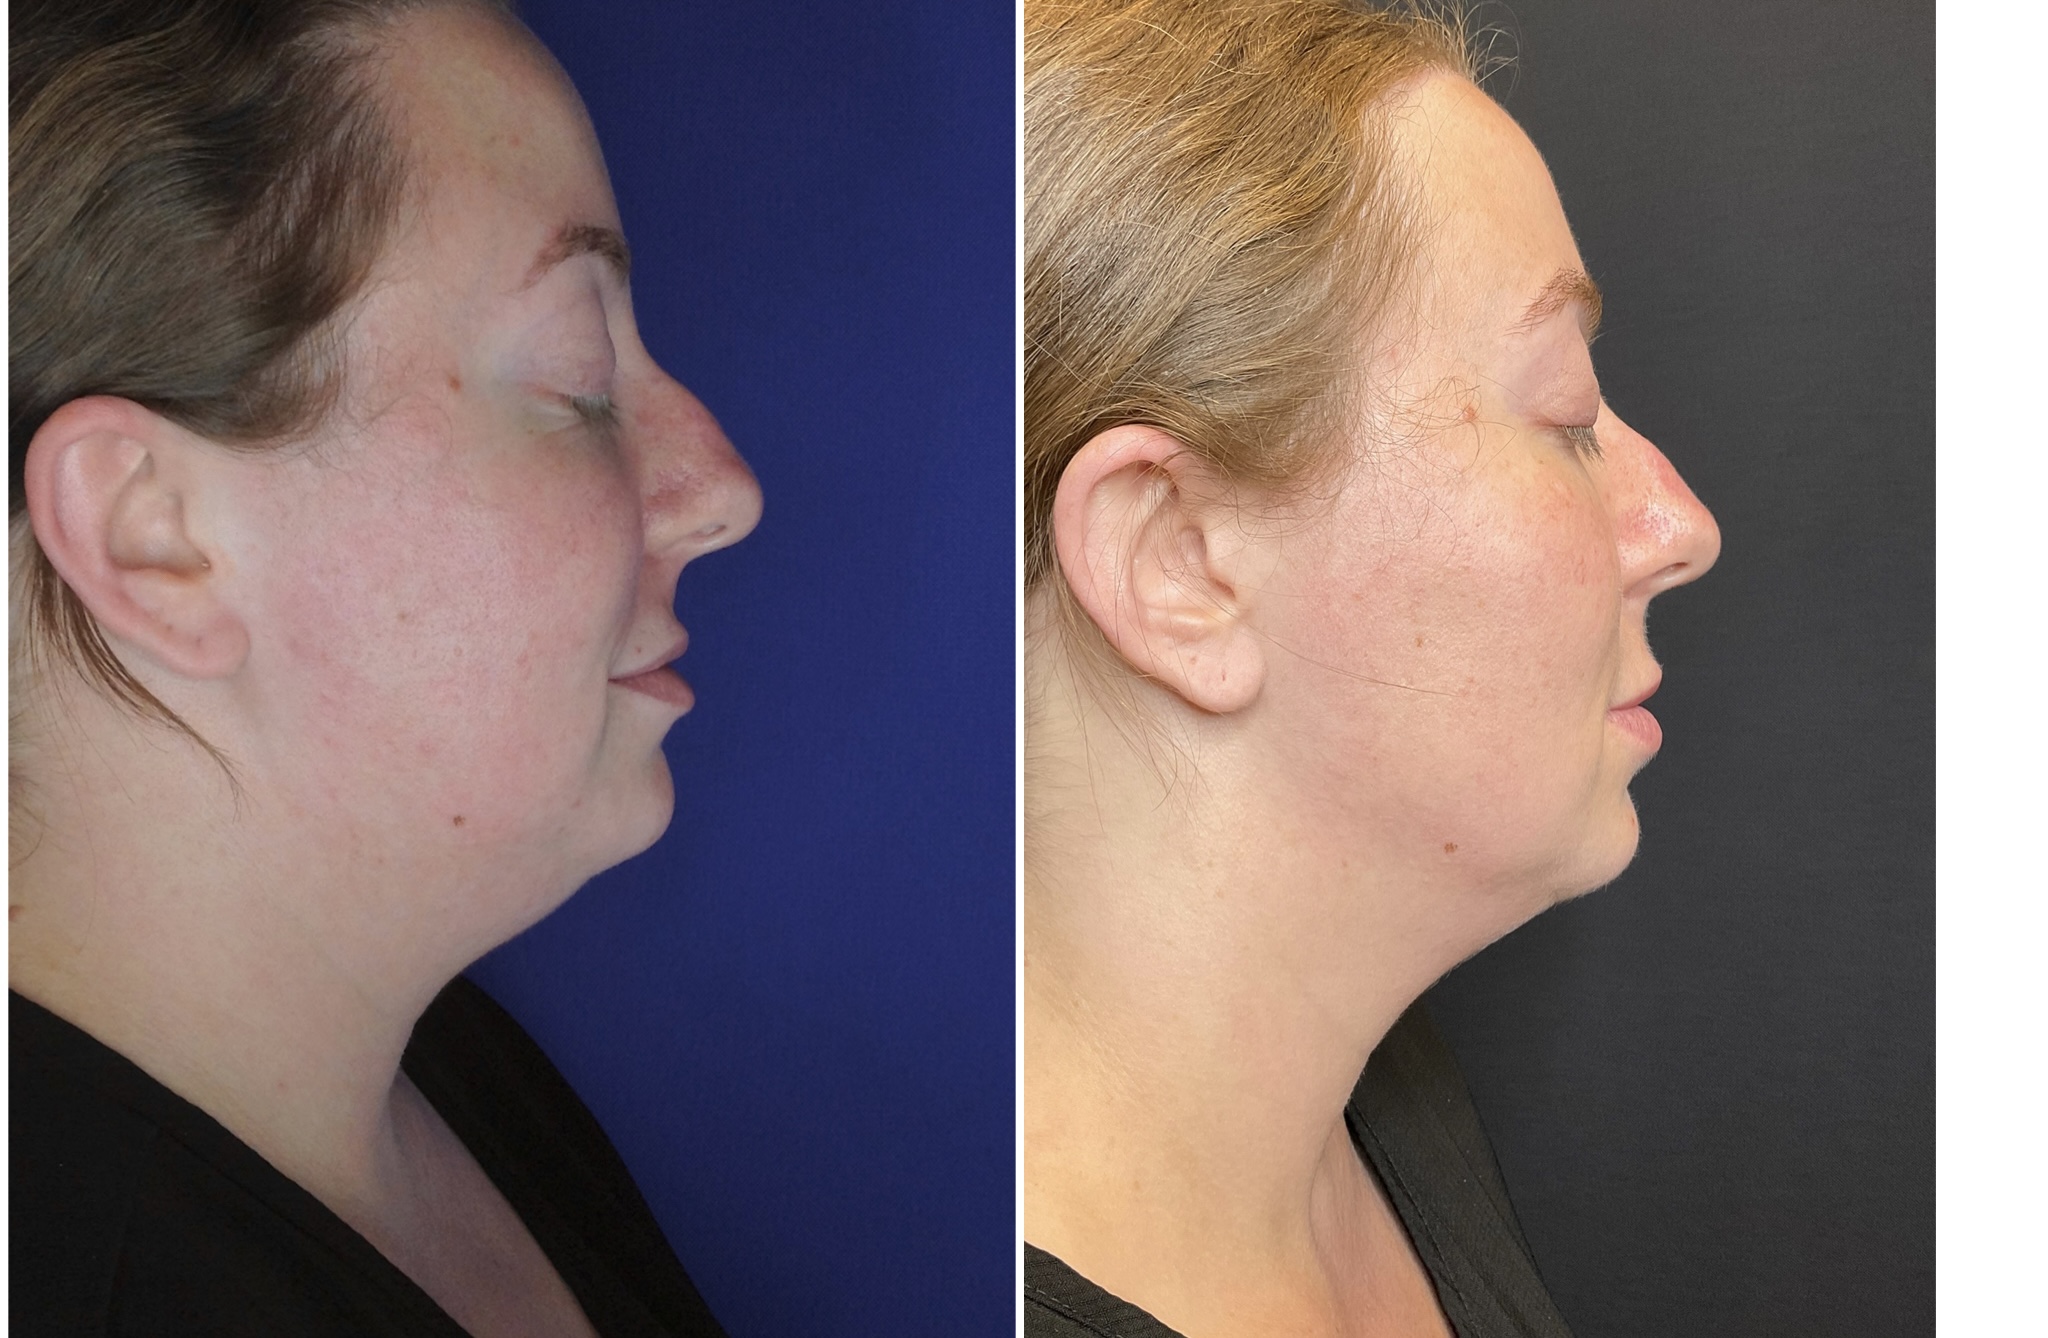 Kybella Injections B&A 3 sessions- Submental